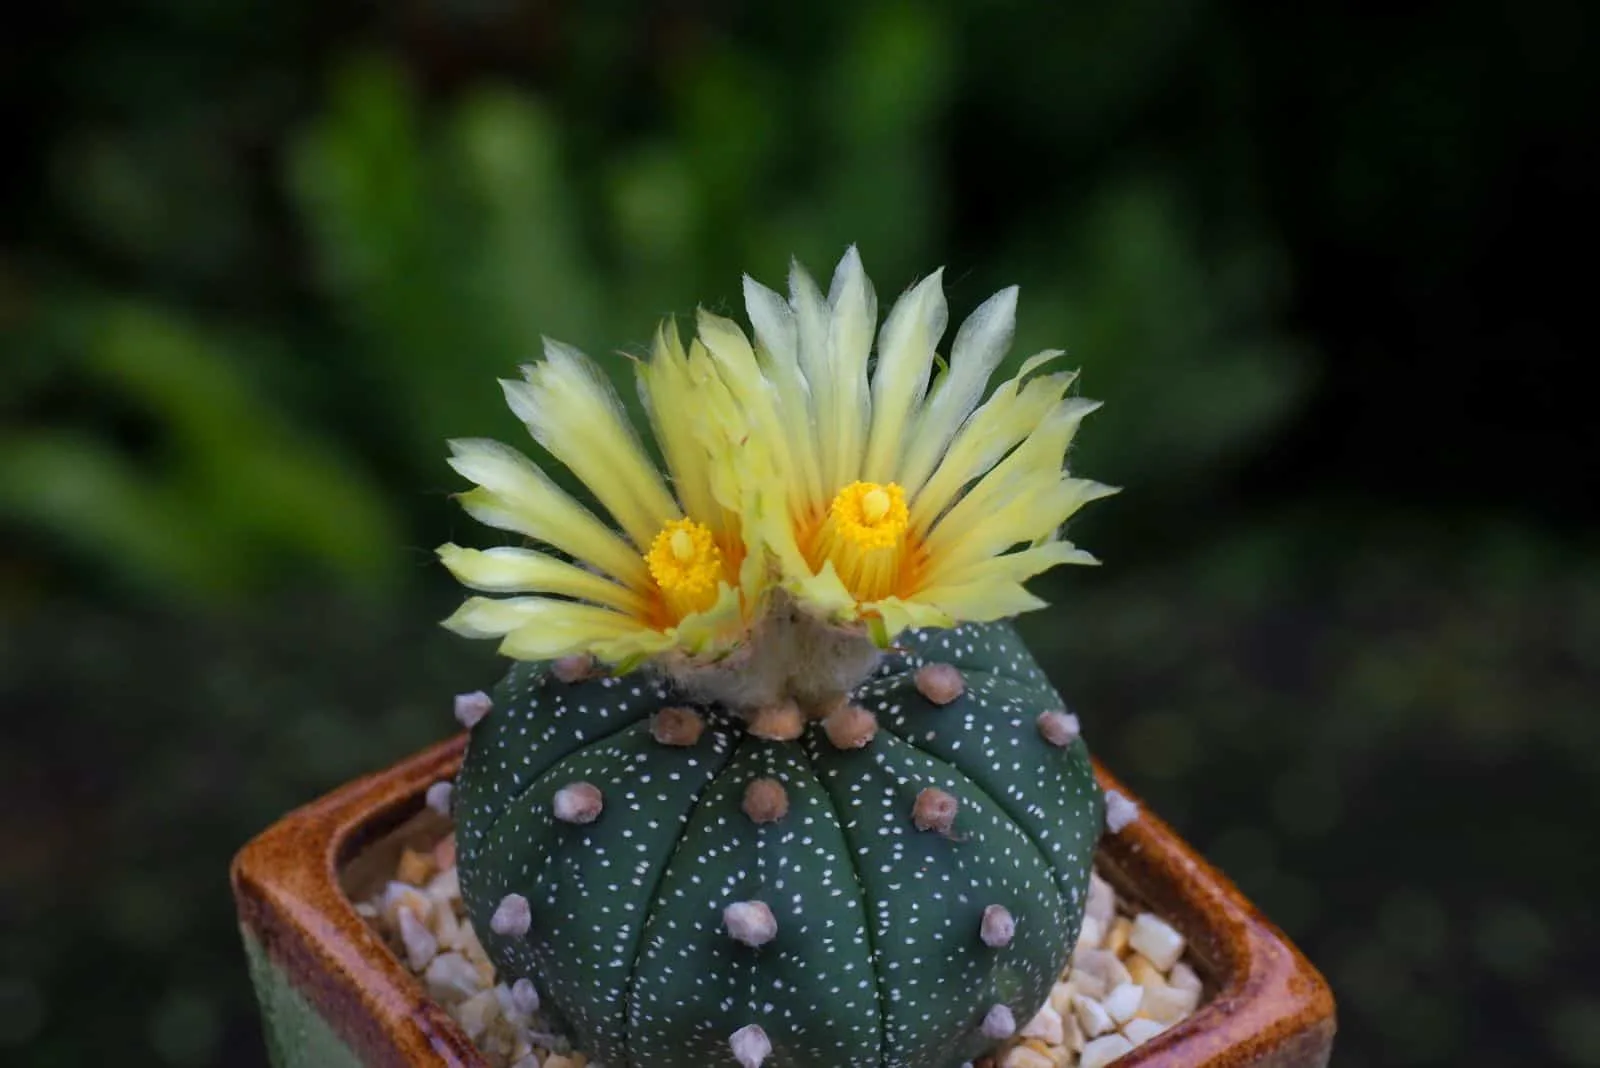 Star Cactus with yellow flower